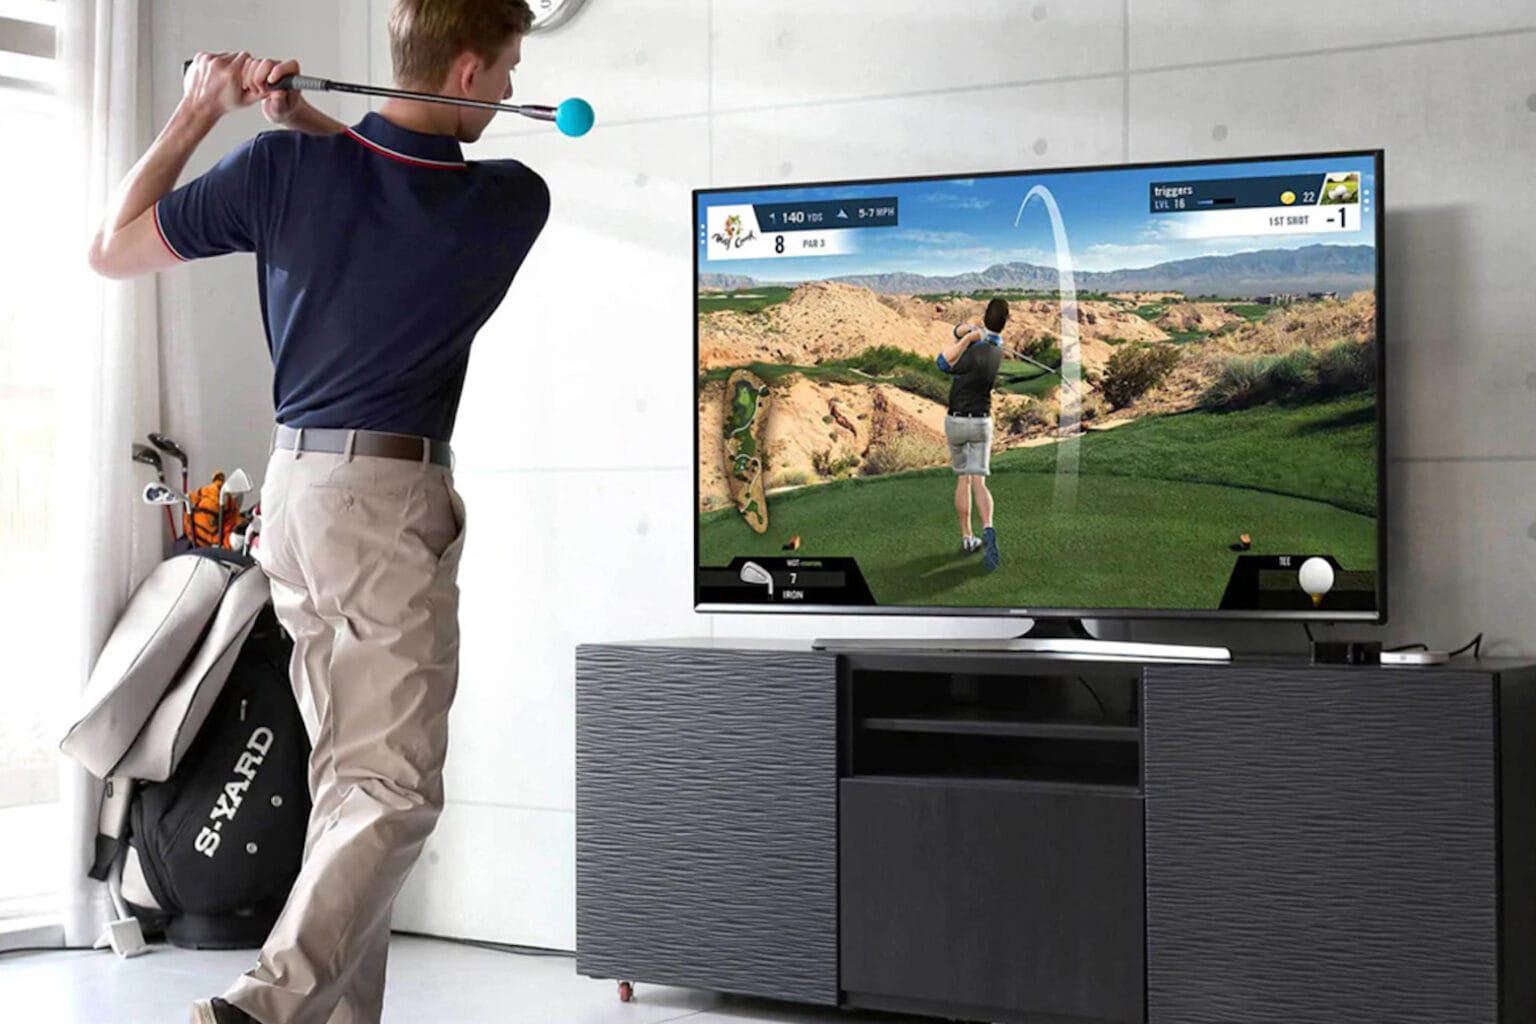 Golf anywhere with your iPhone and the Phigolf swing trainer.